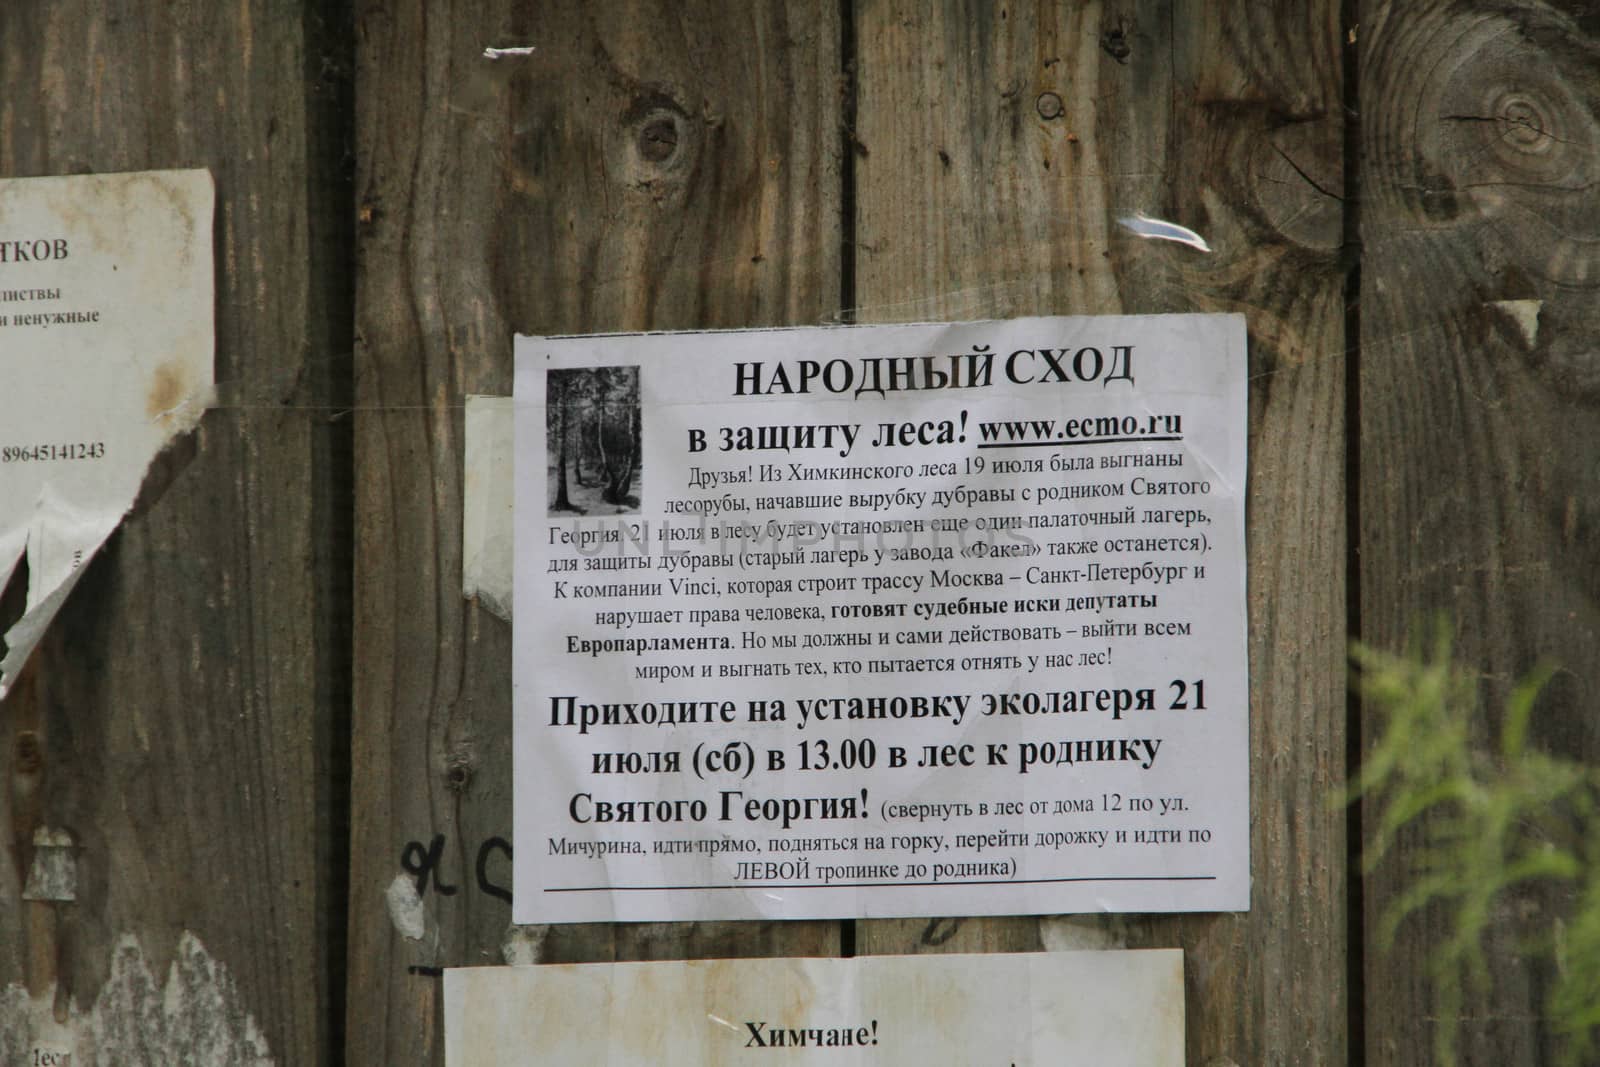 Khimki, Moscow region, Russia - July 21, 2012. The announcement of the defenders of Khimki forest, calling out at the gathering in defense of oak